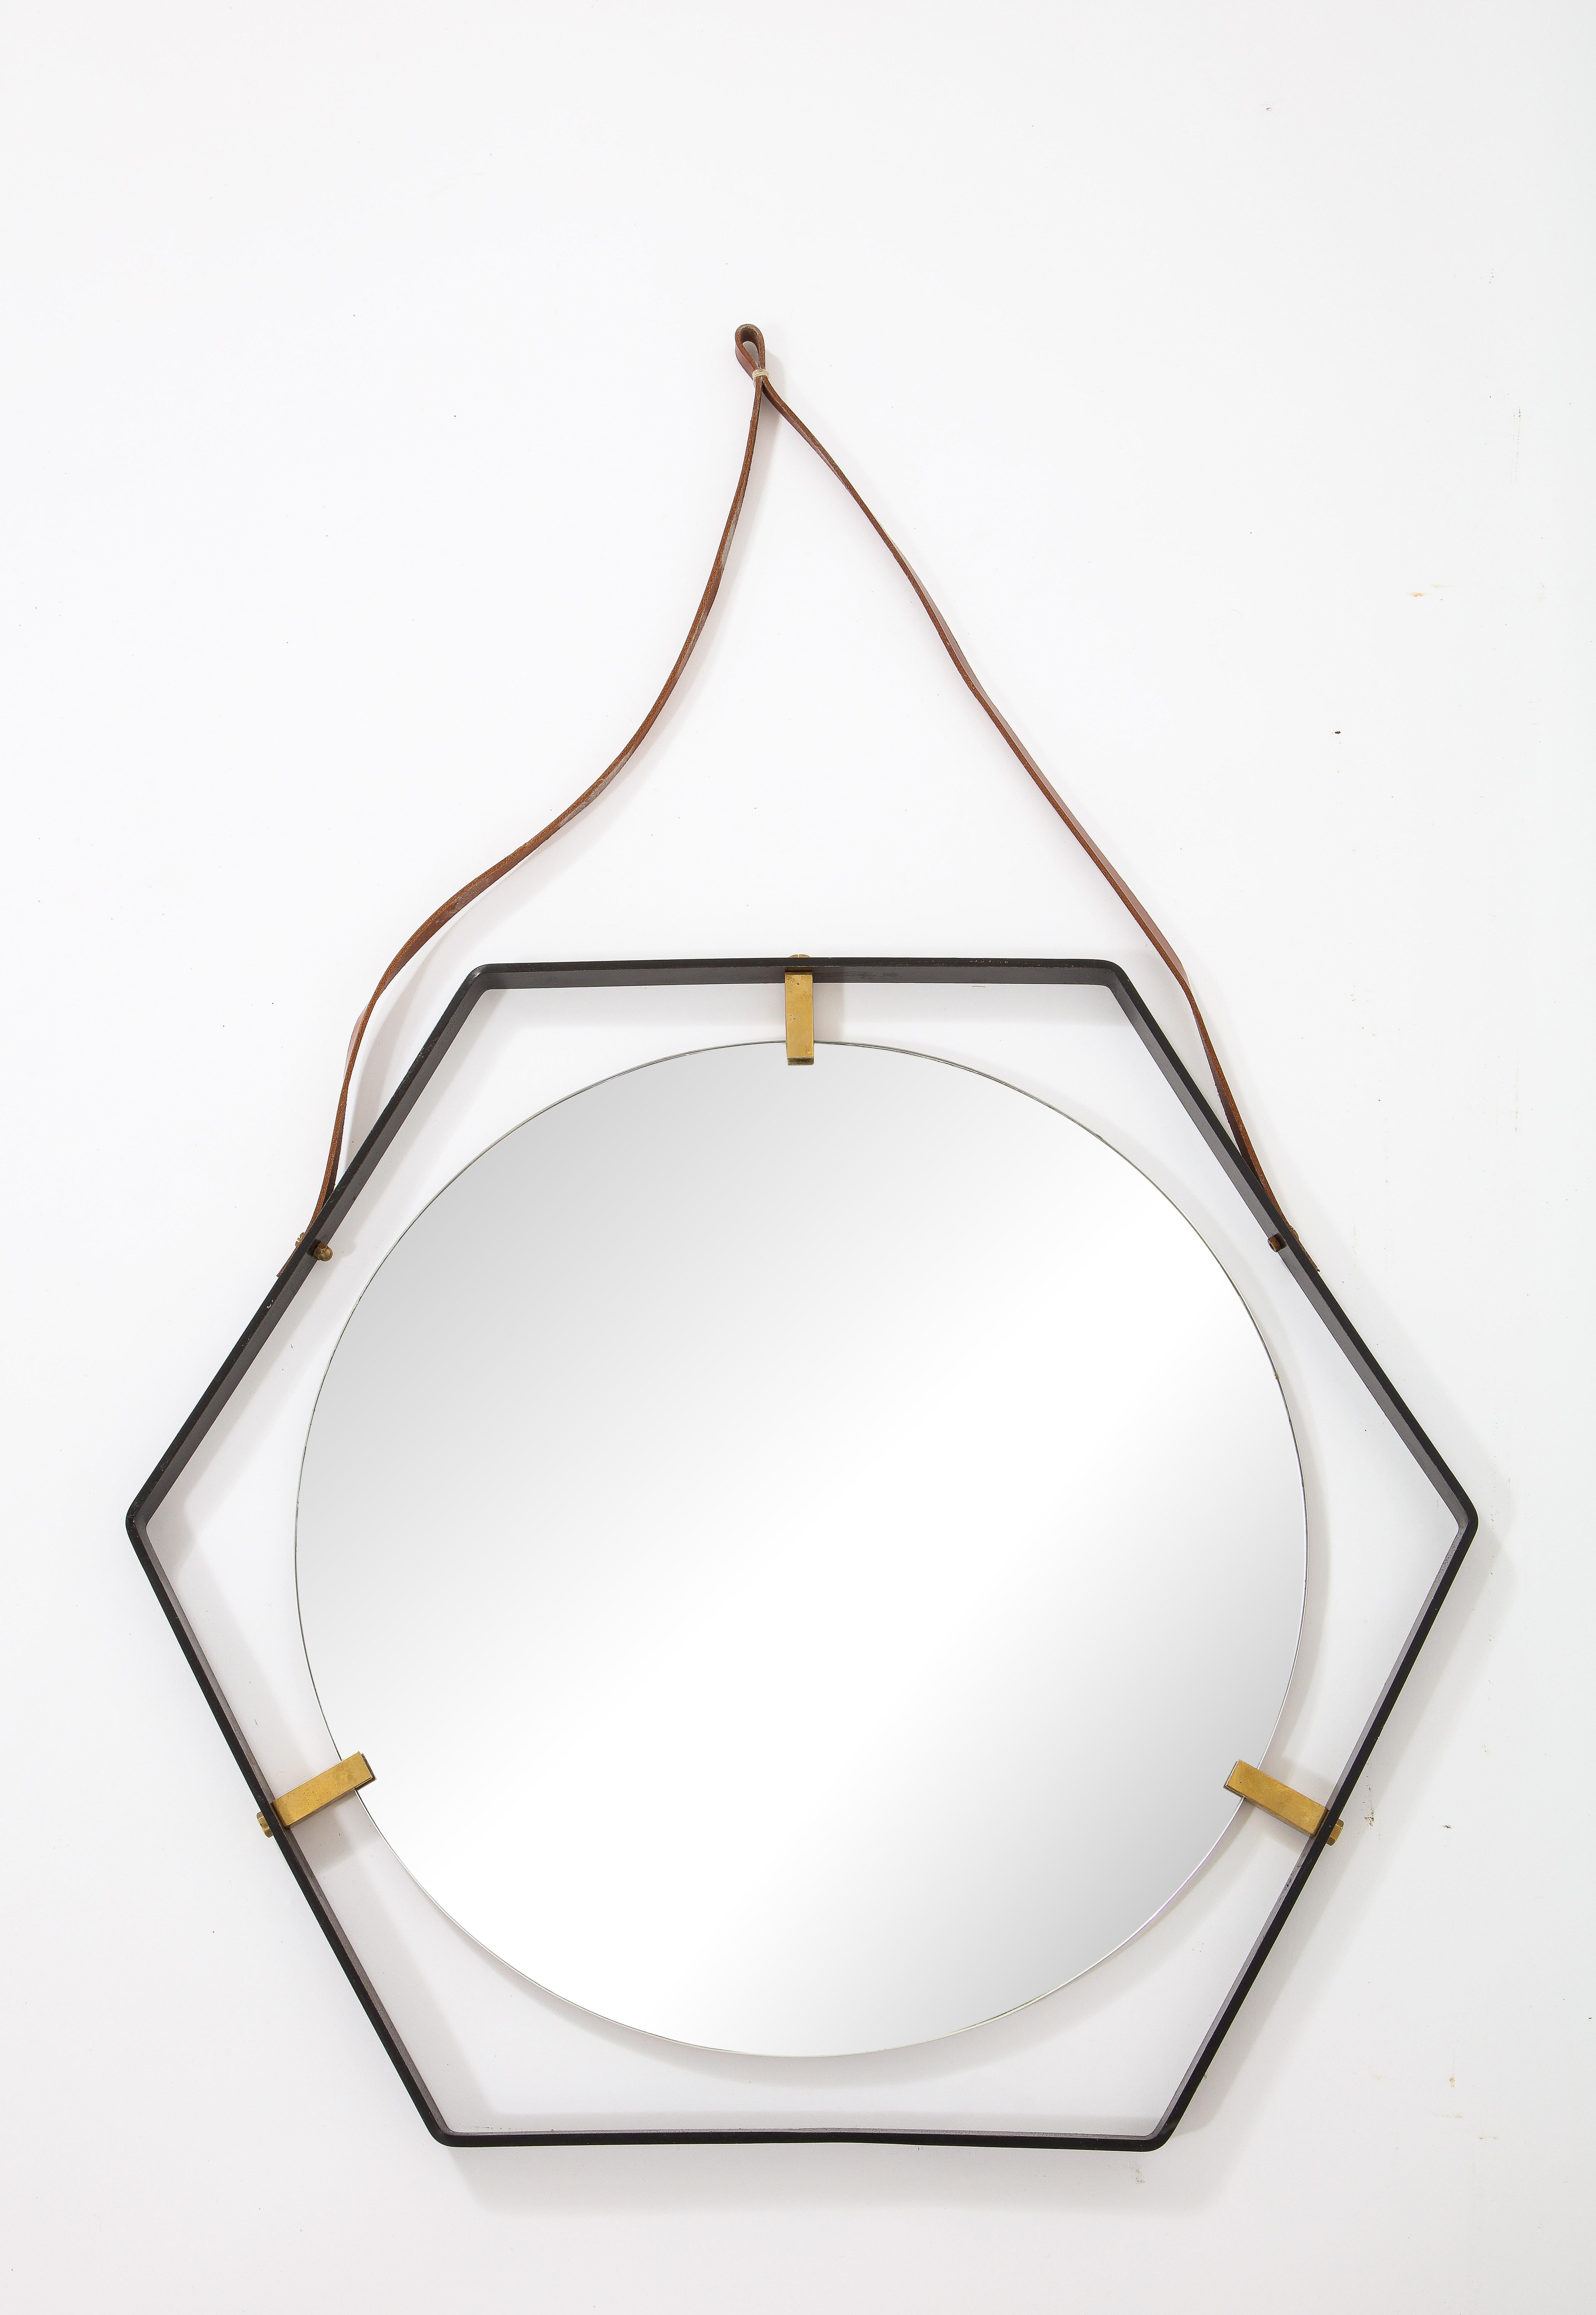 Octagonal Wrought Iron Mirror on Leather Strap, France 1960's For Sale 4